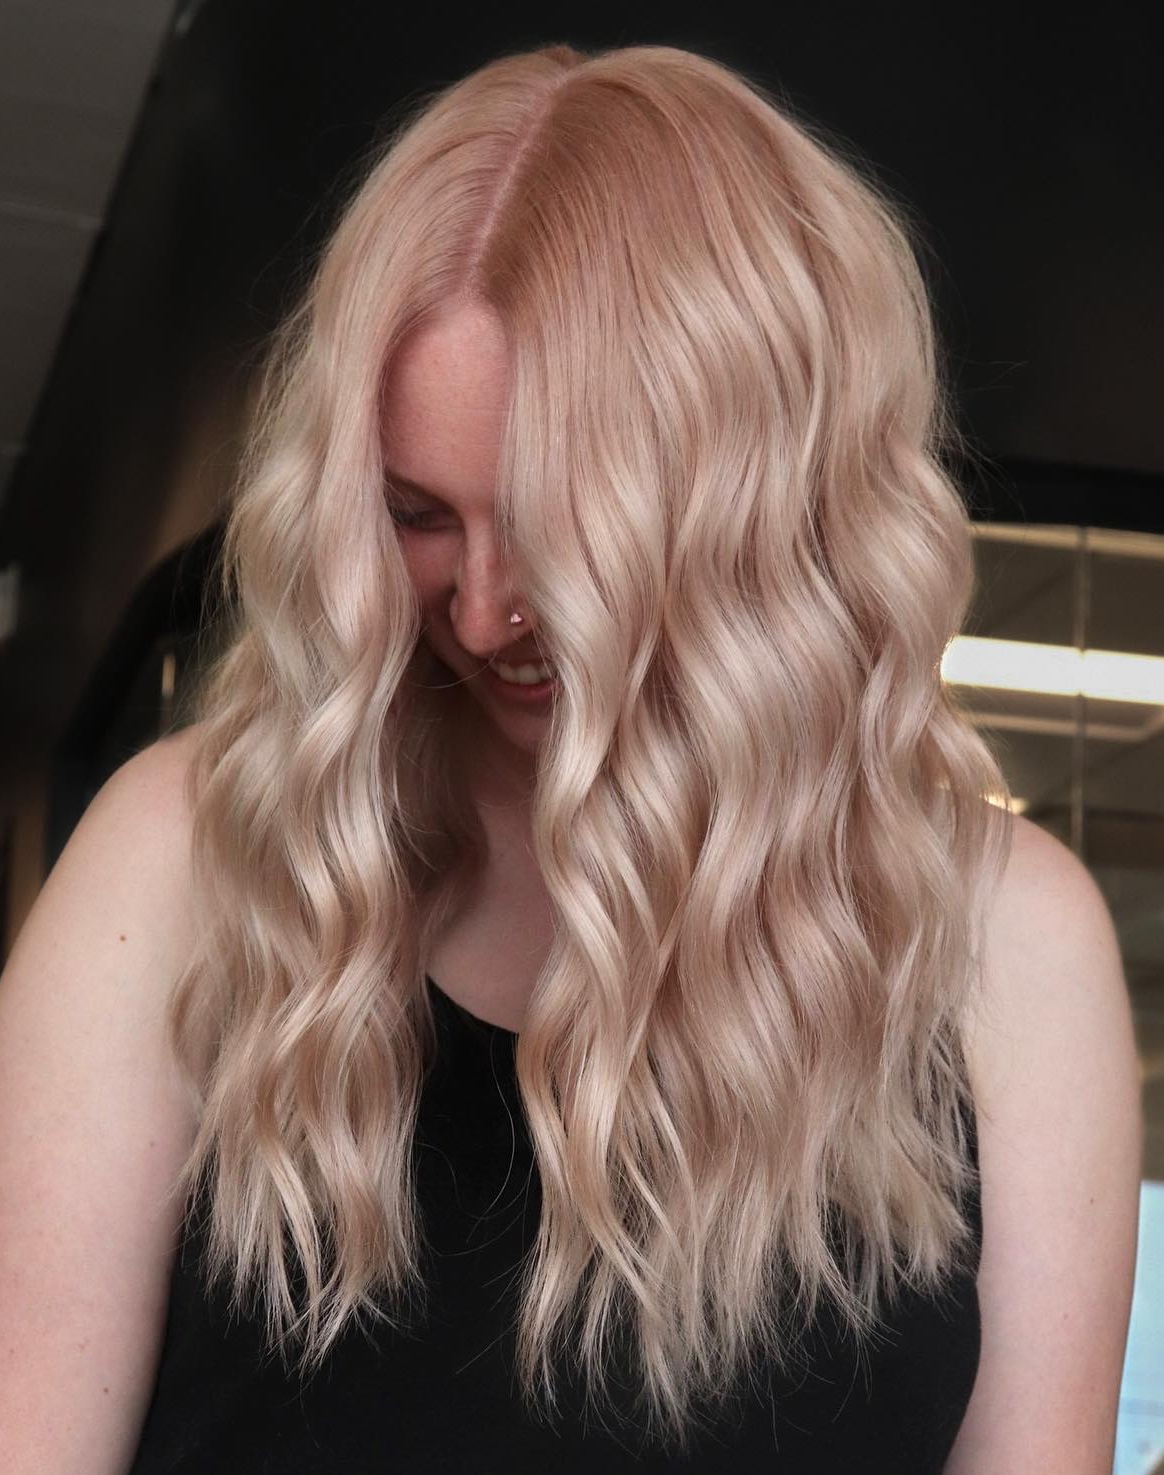 Washed Out Rose Gold Color on Long Wavy Hair